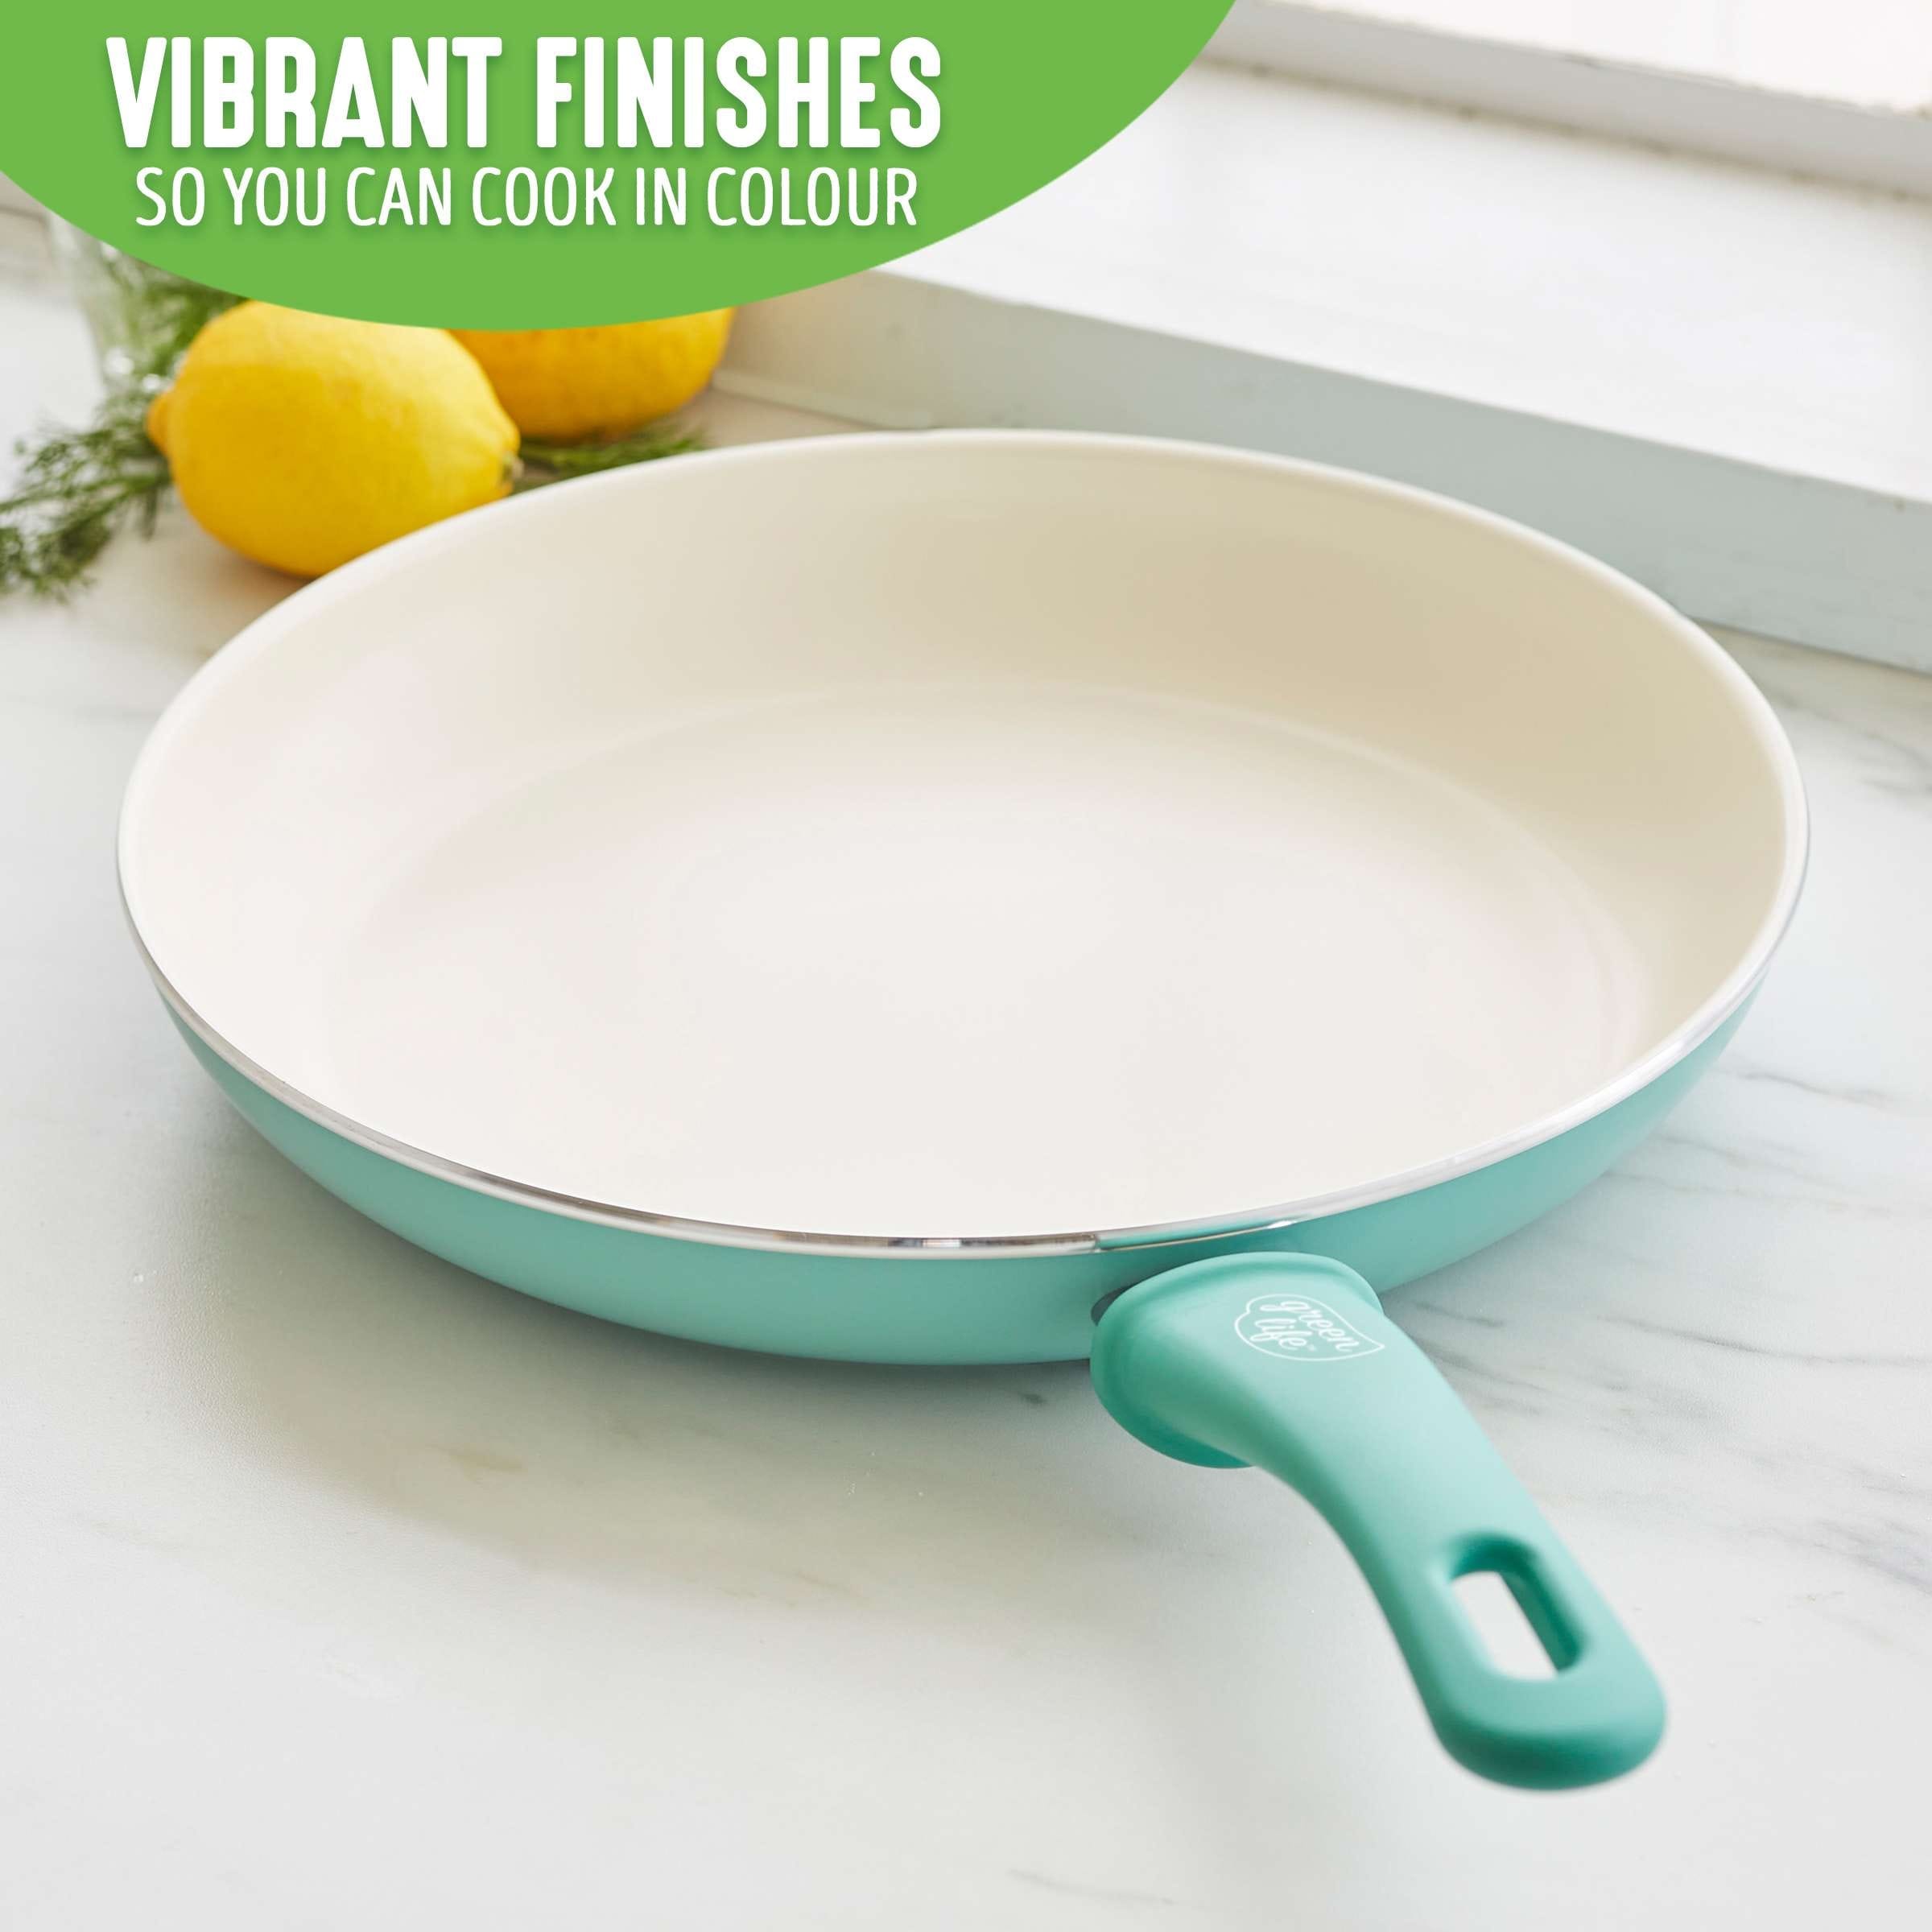 https://ak1.ostkcdn.com/images/products/is/images/direct/0c7e742c105b7dab7af7fbdc0431d98d9a62d0a8/GreenLife-Soft-Grip-12%22-Open-Fry-Pan.jpg